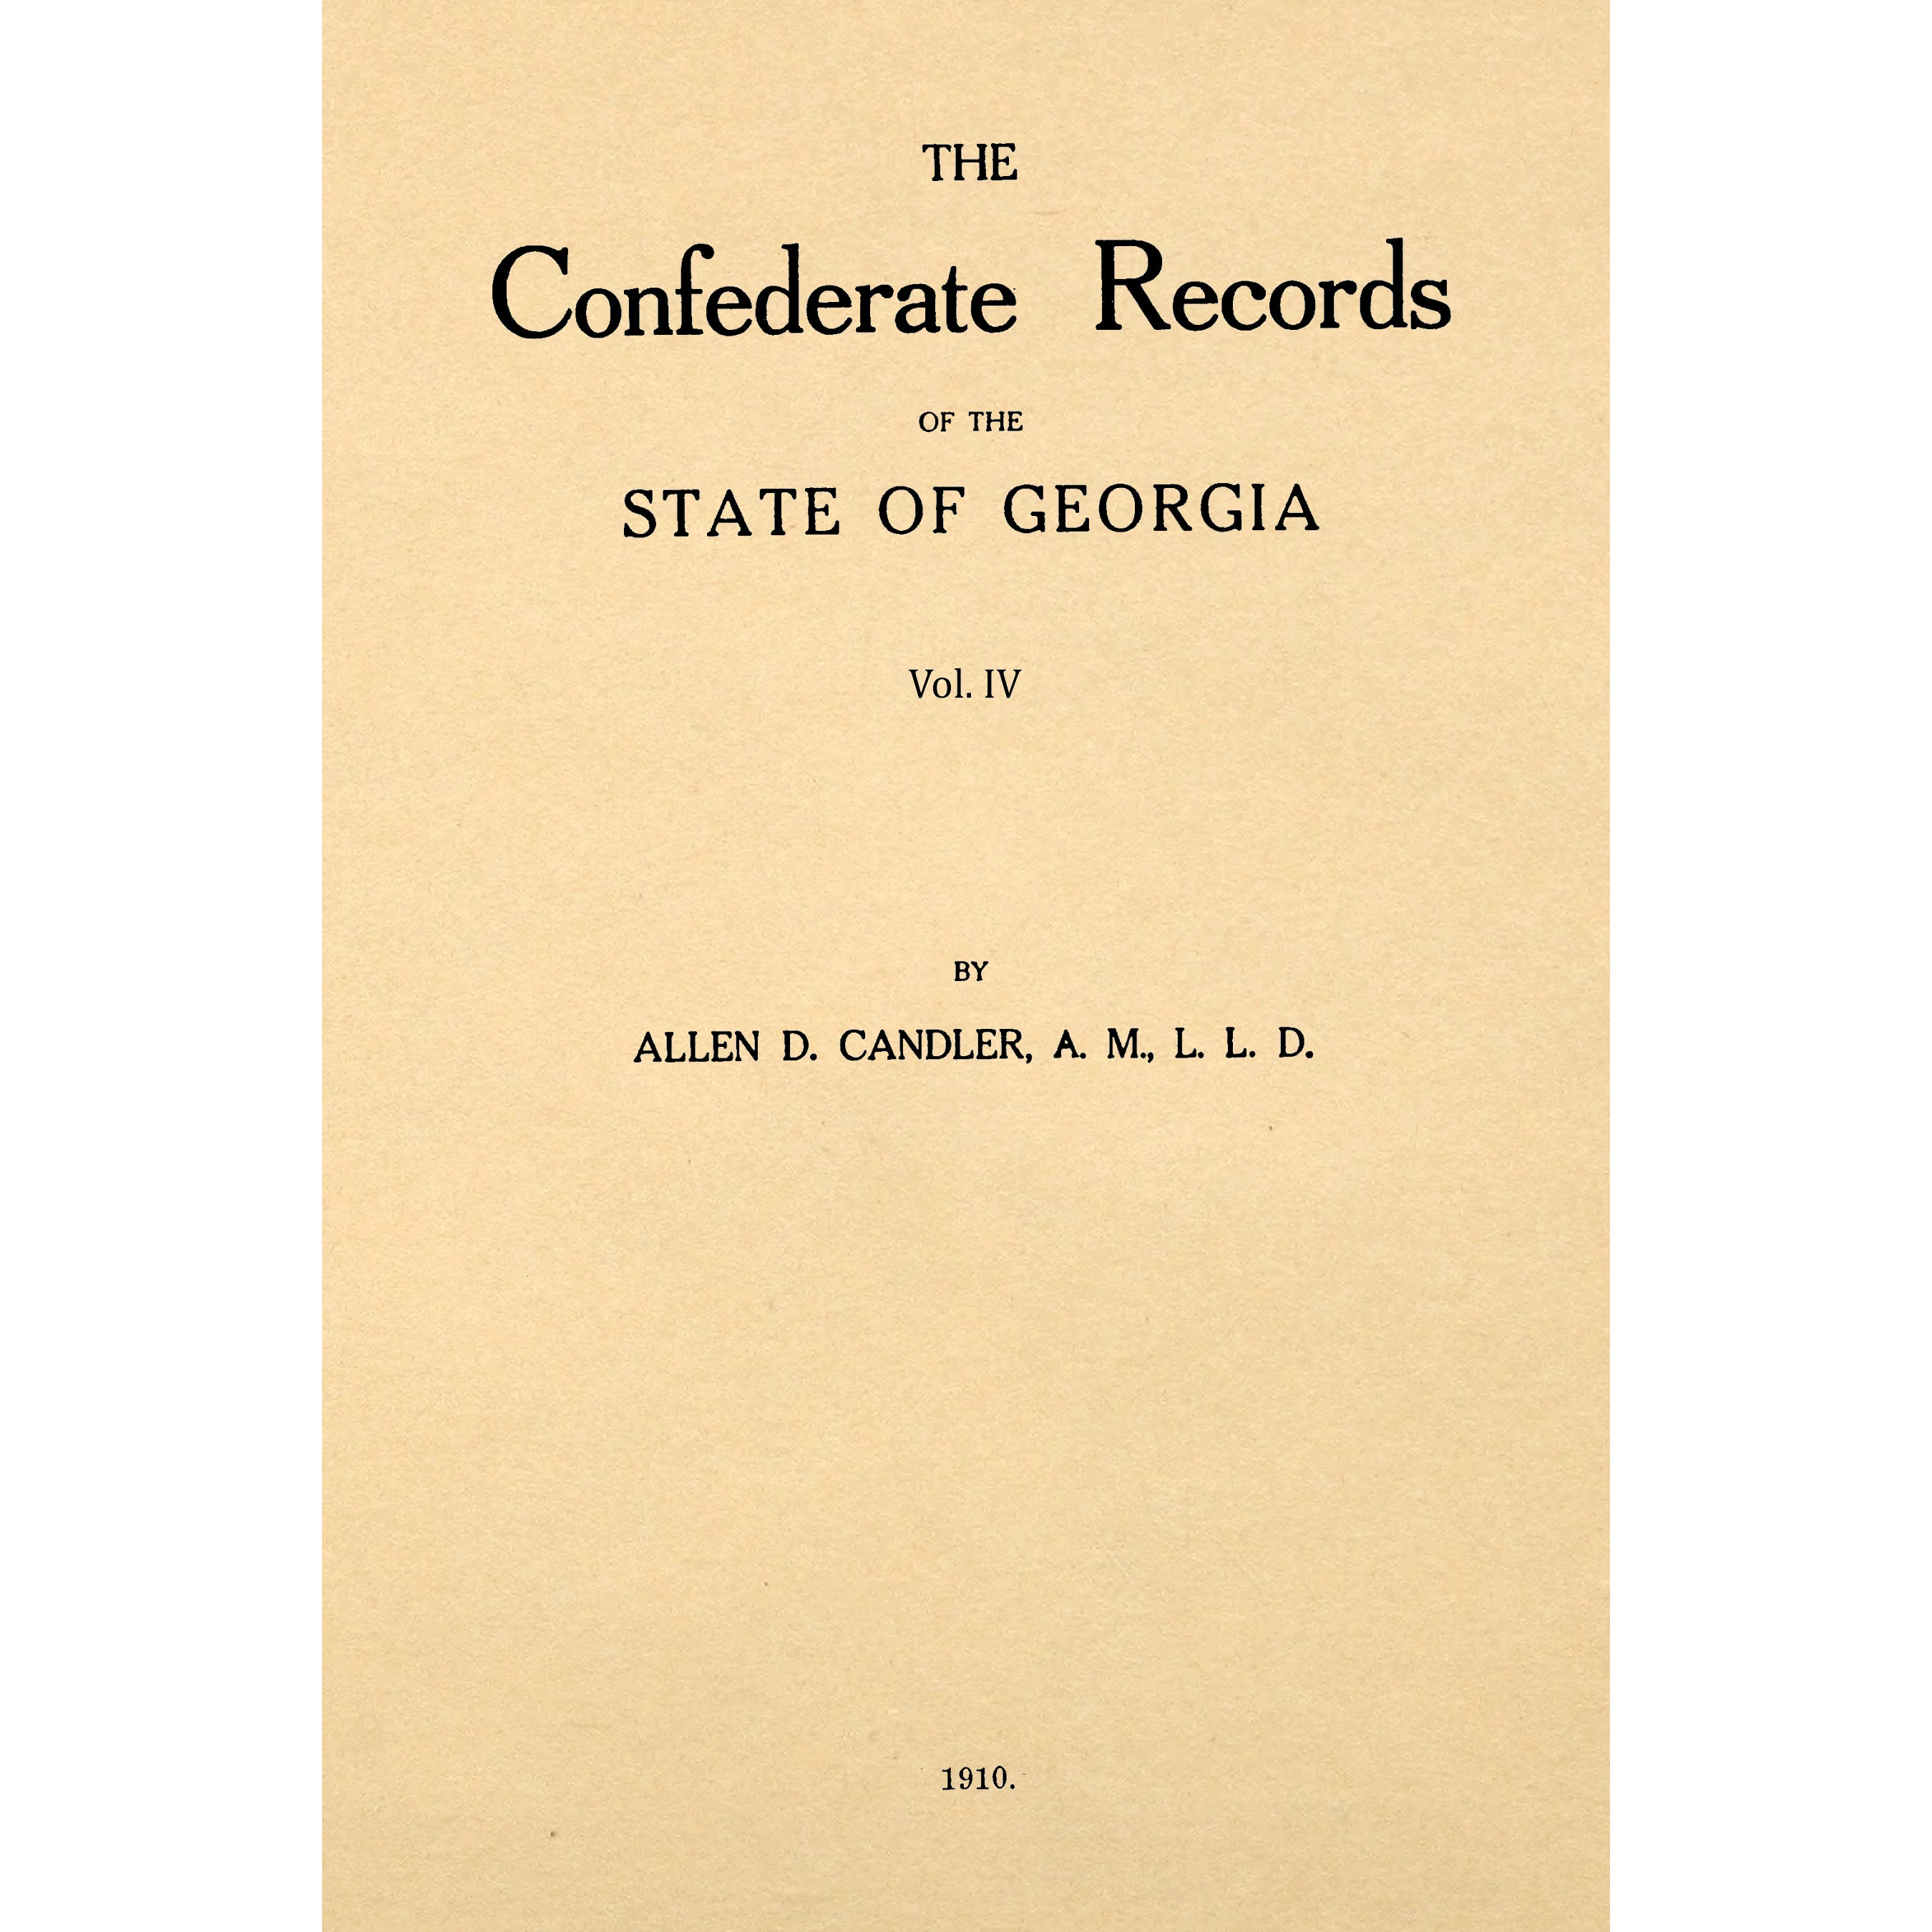 The Confederate records of the State of Georgia volume 4